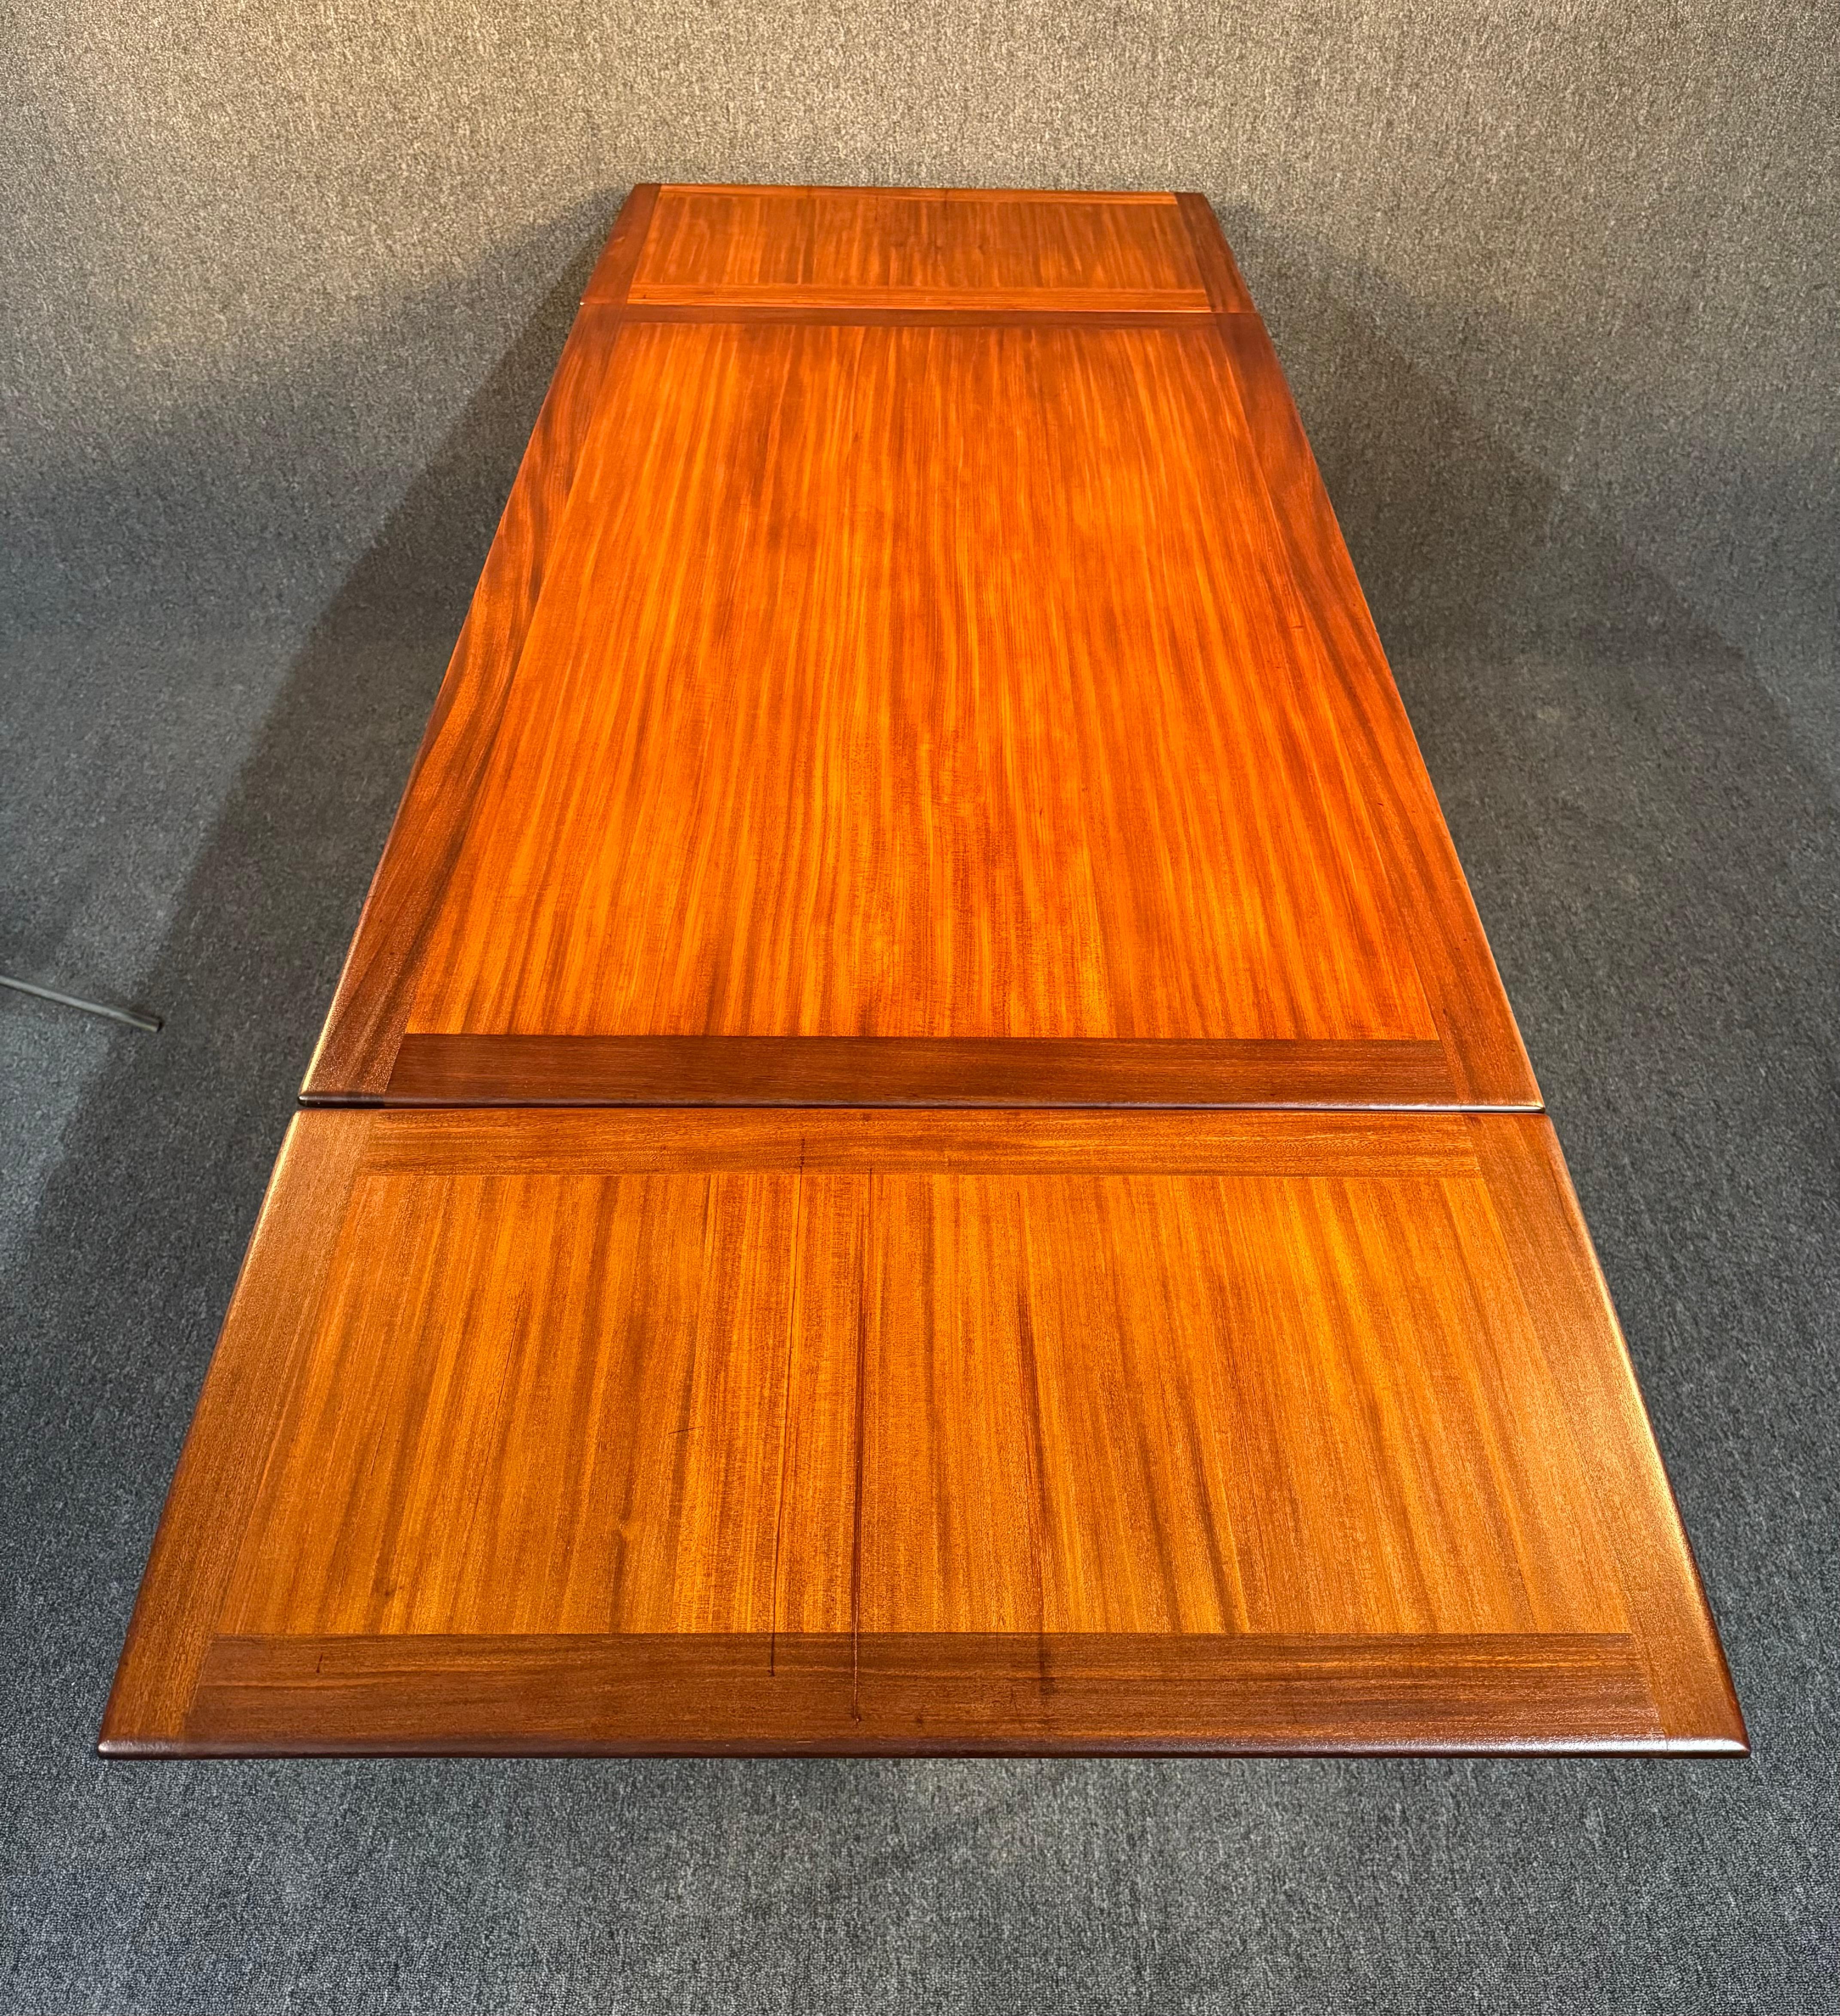 Woodwork Vintage British Mid Century Modern Afromasia Teak Dining Table by A. Younger Ltd For Sale